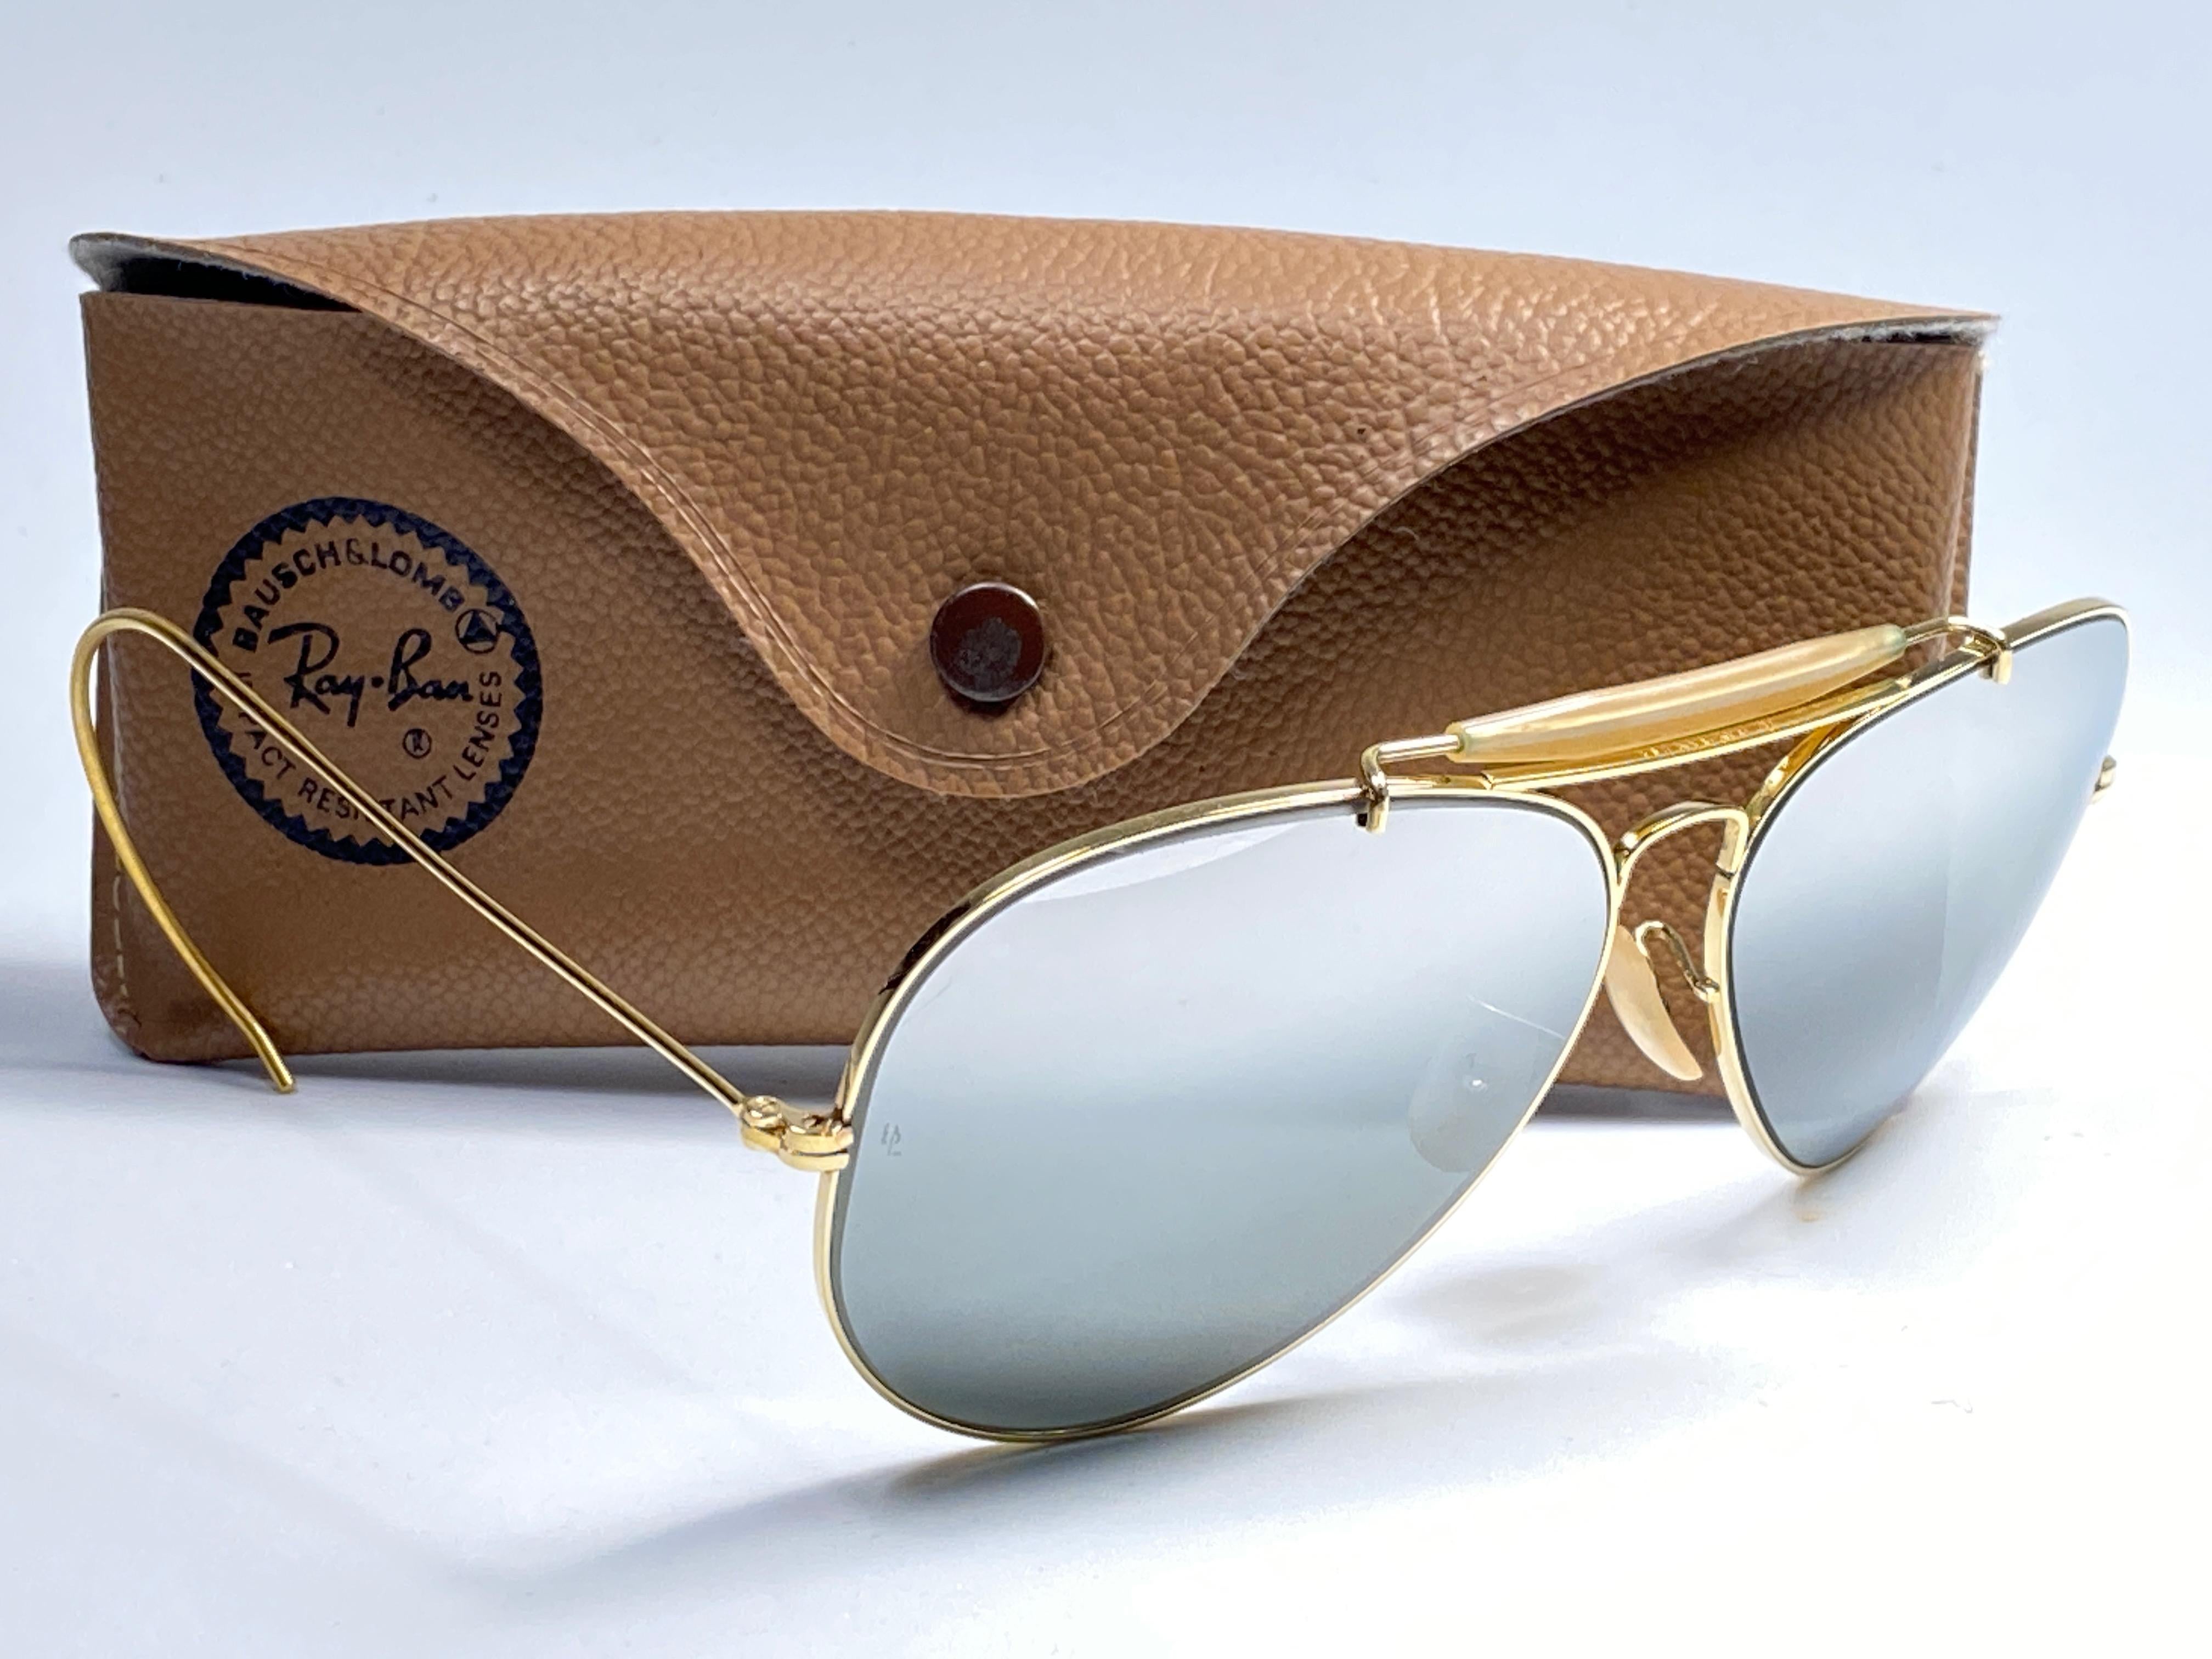 New Vintage Ray Ban Aviator gold 62mm with double mirror  lenses. 
B&L etched twice in both lenses.  
Comes with its original Ray Ban B&L case. 

Please notice this pair may have minor sign of wear due to nearly 40 years of storage.
